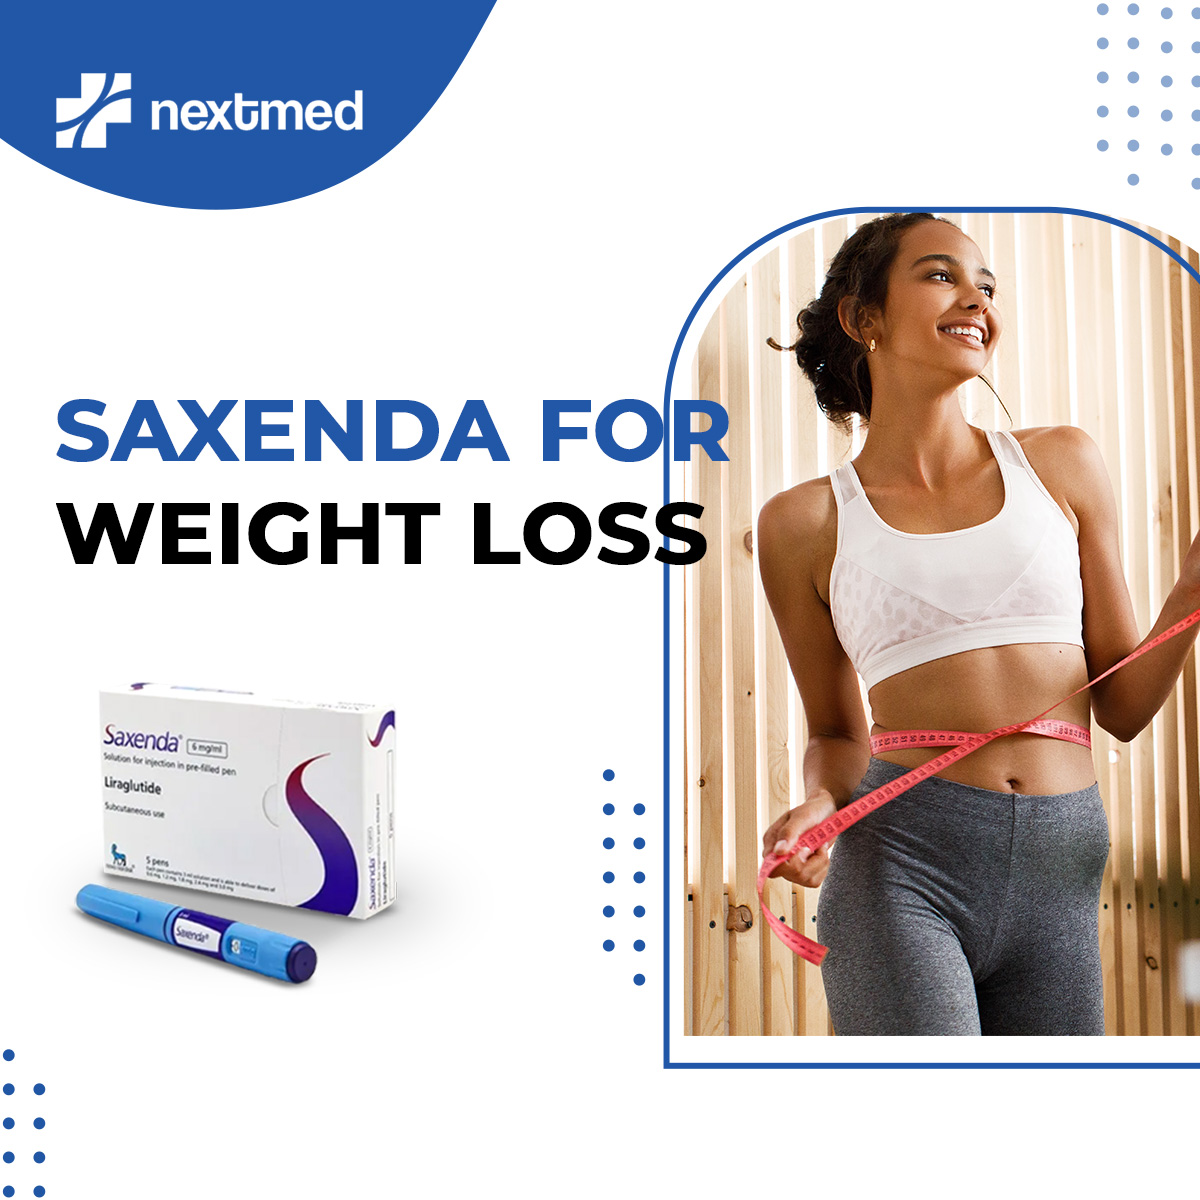 Saxenda: Injecting A Lifeline For Individuals Struggling With Weight - TIMES OF RISING